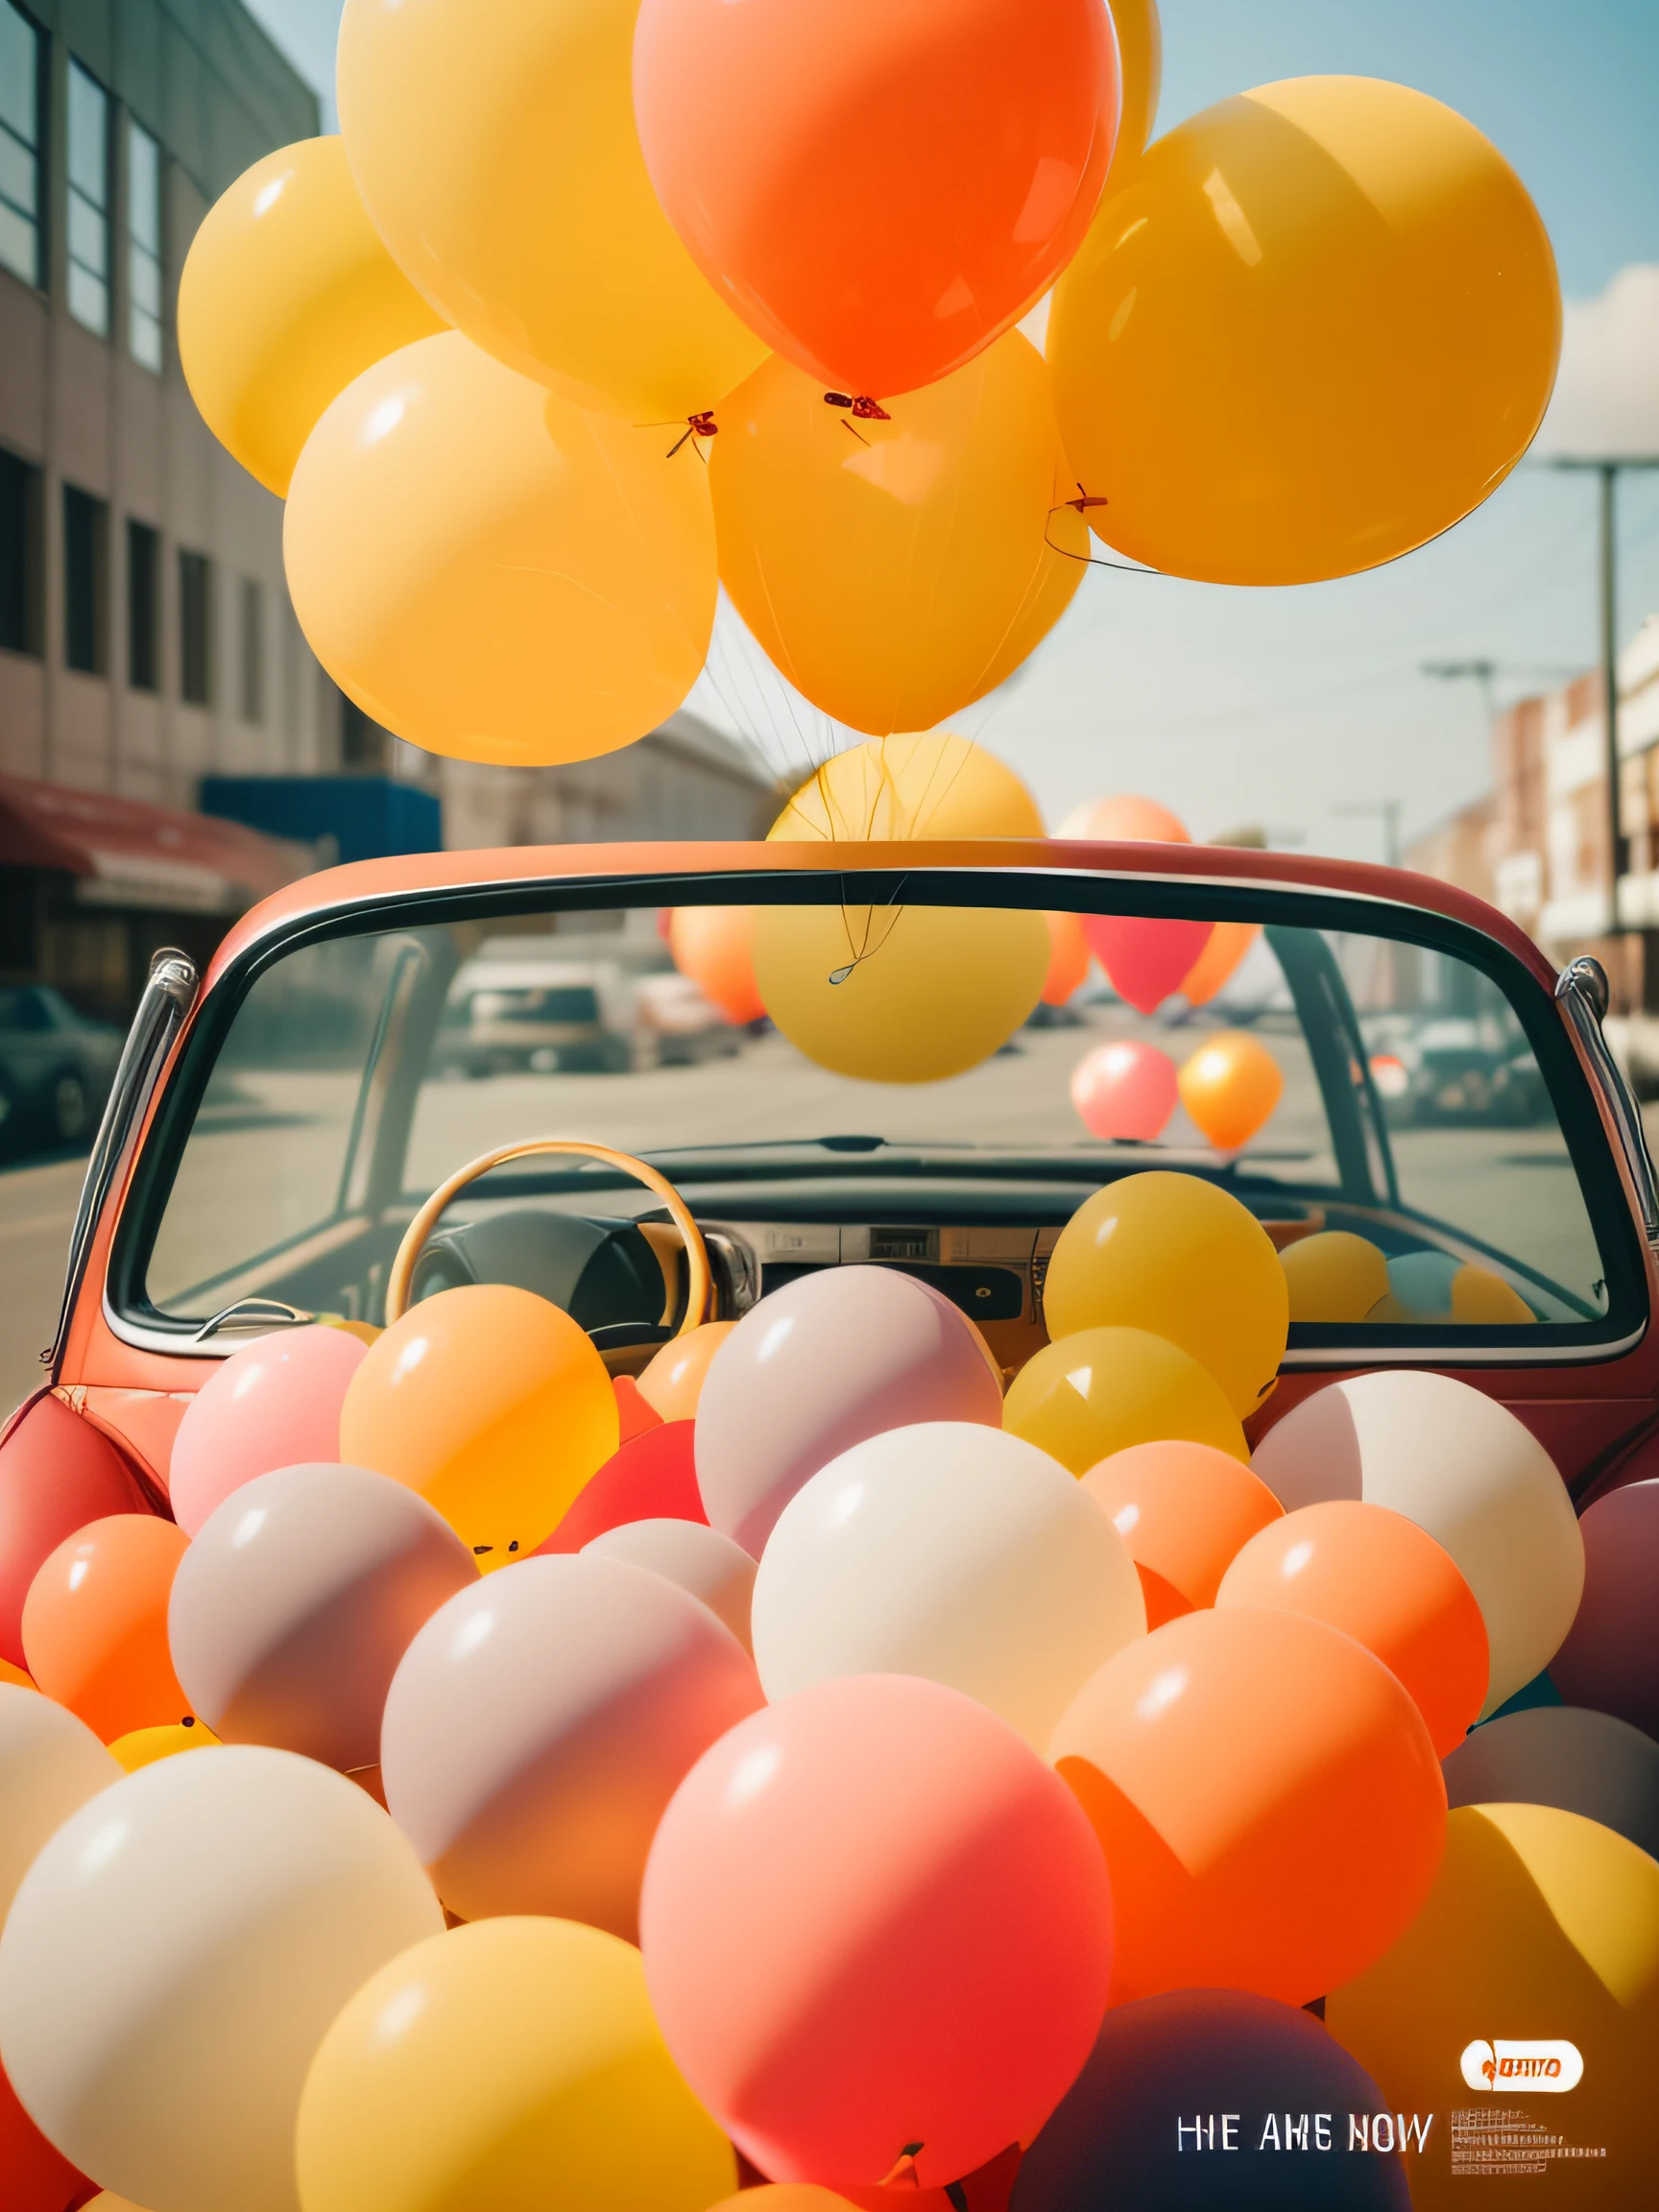 There is a car，There are many balloons attached to it, baloons